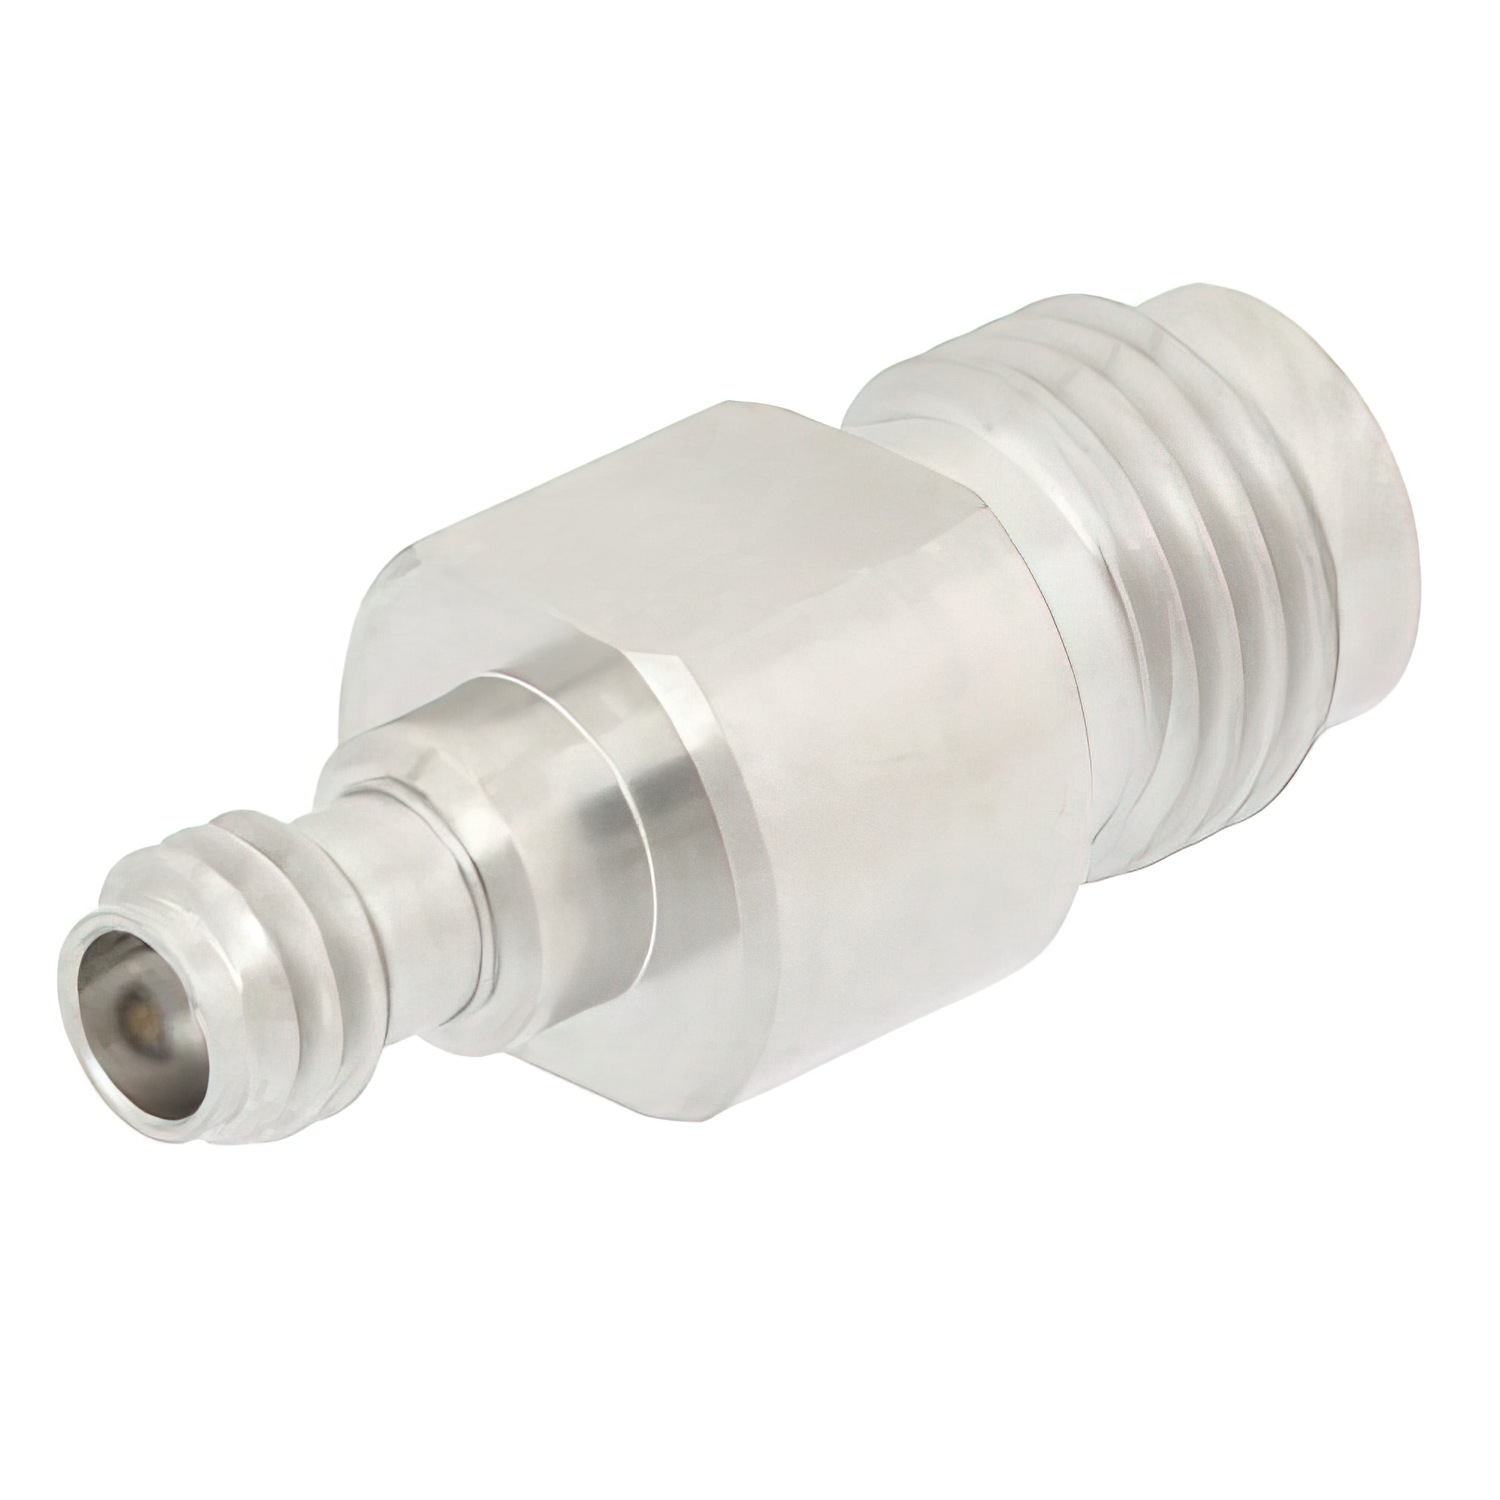 1.0mm Female to 1.85mm Female Adapter1